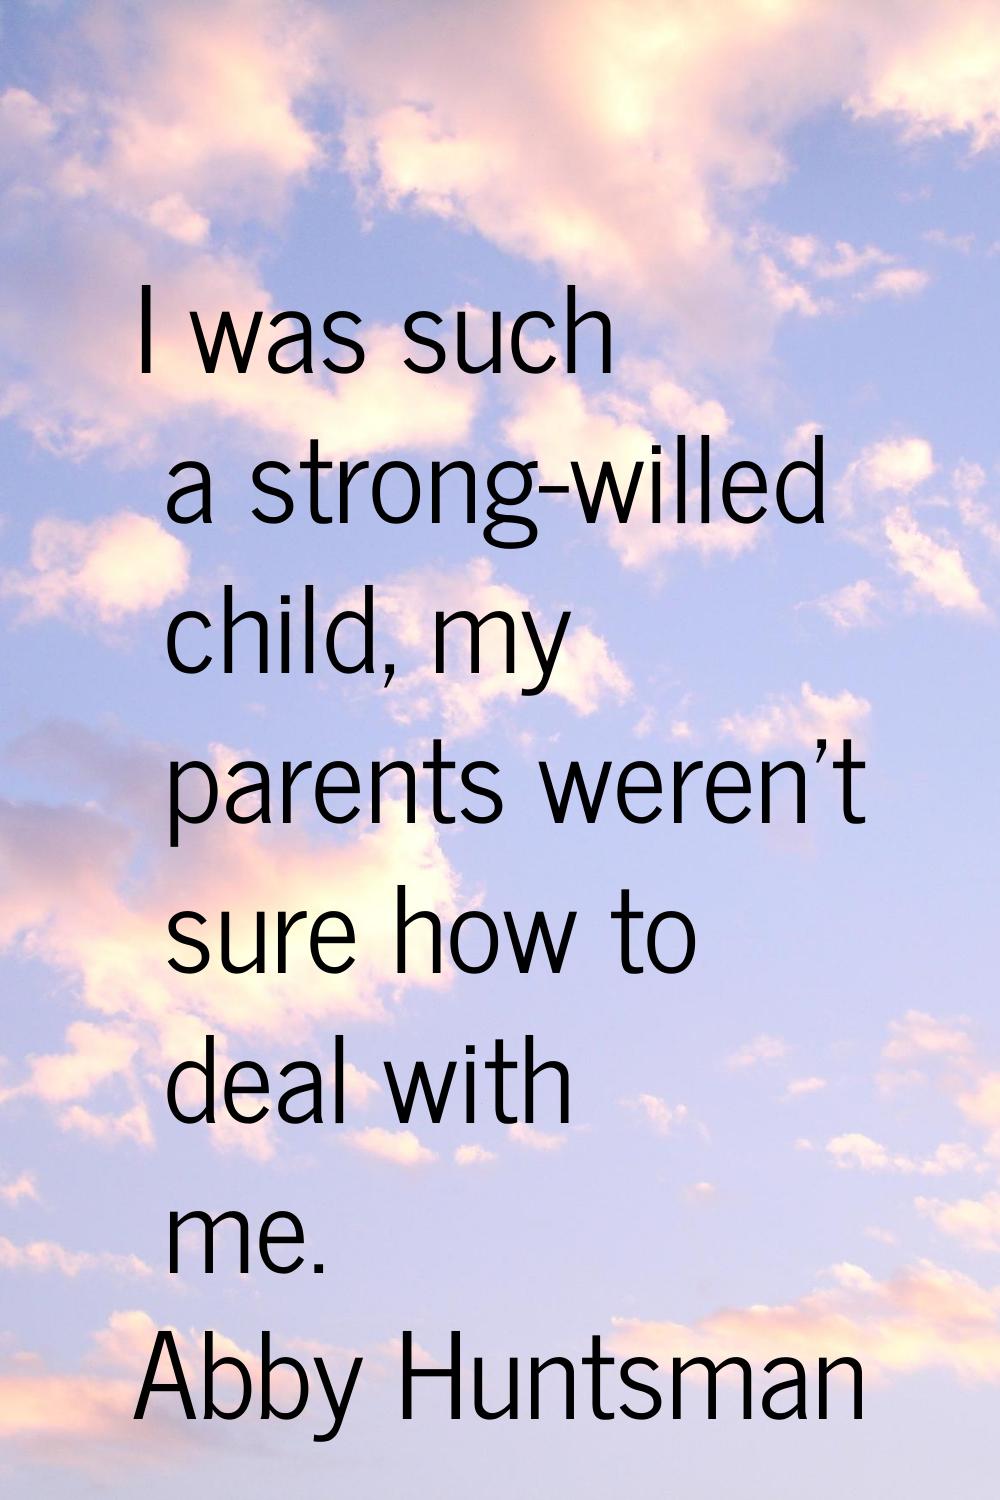 I was such a strong-willed child, my parents weren't sure how to deal with me.